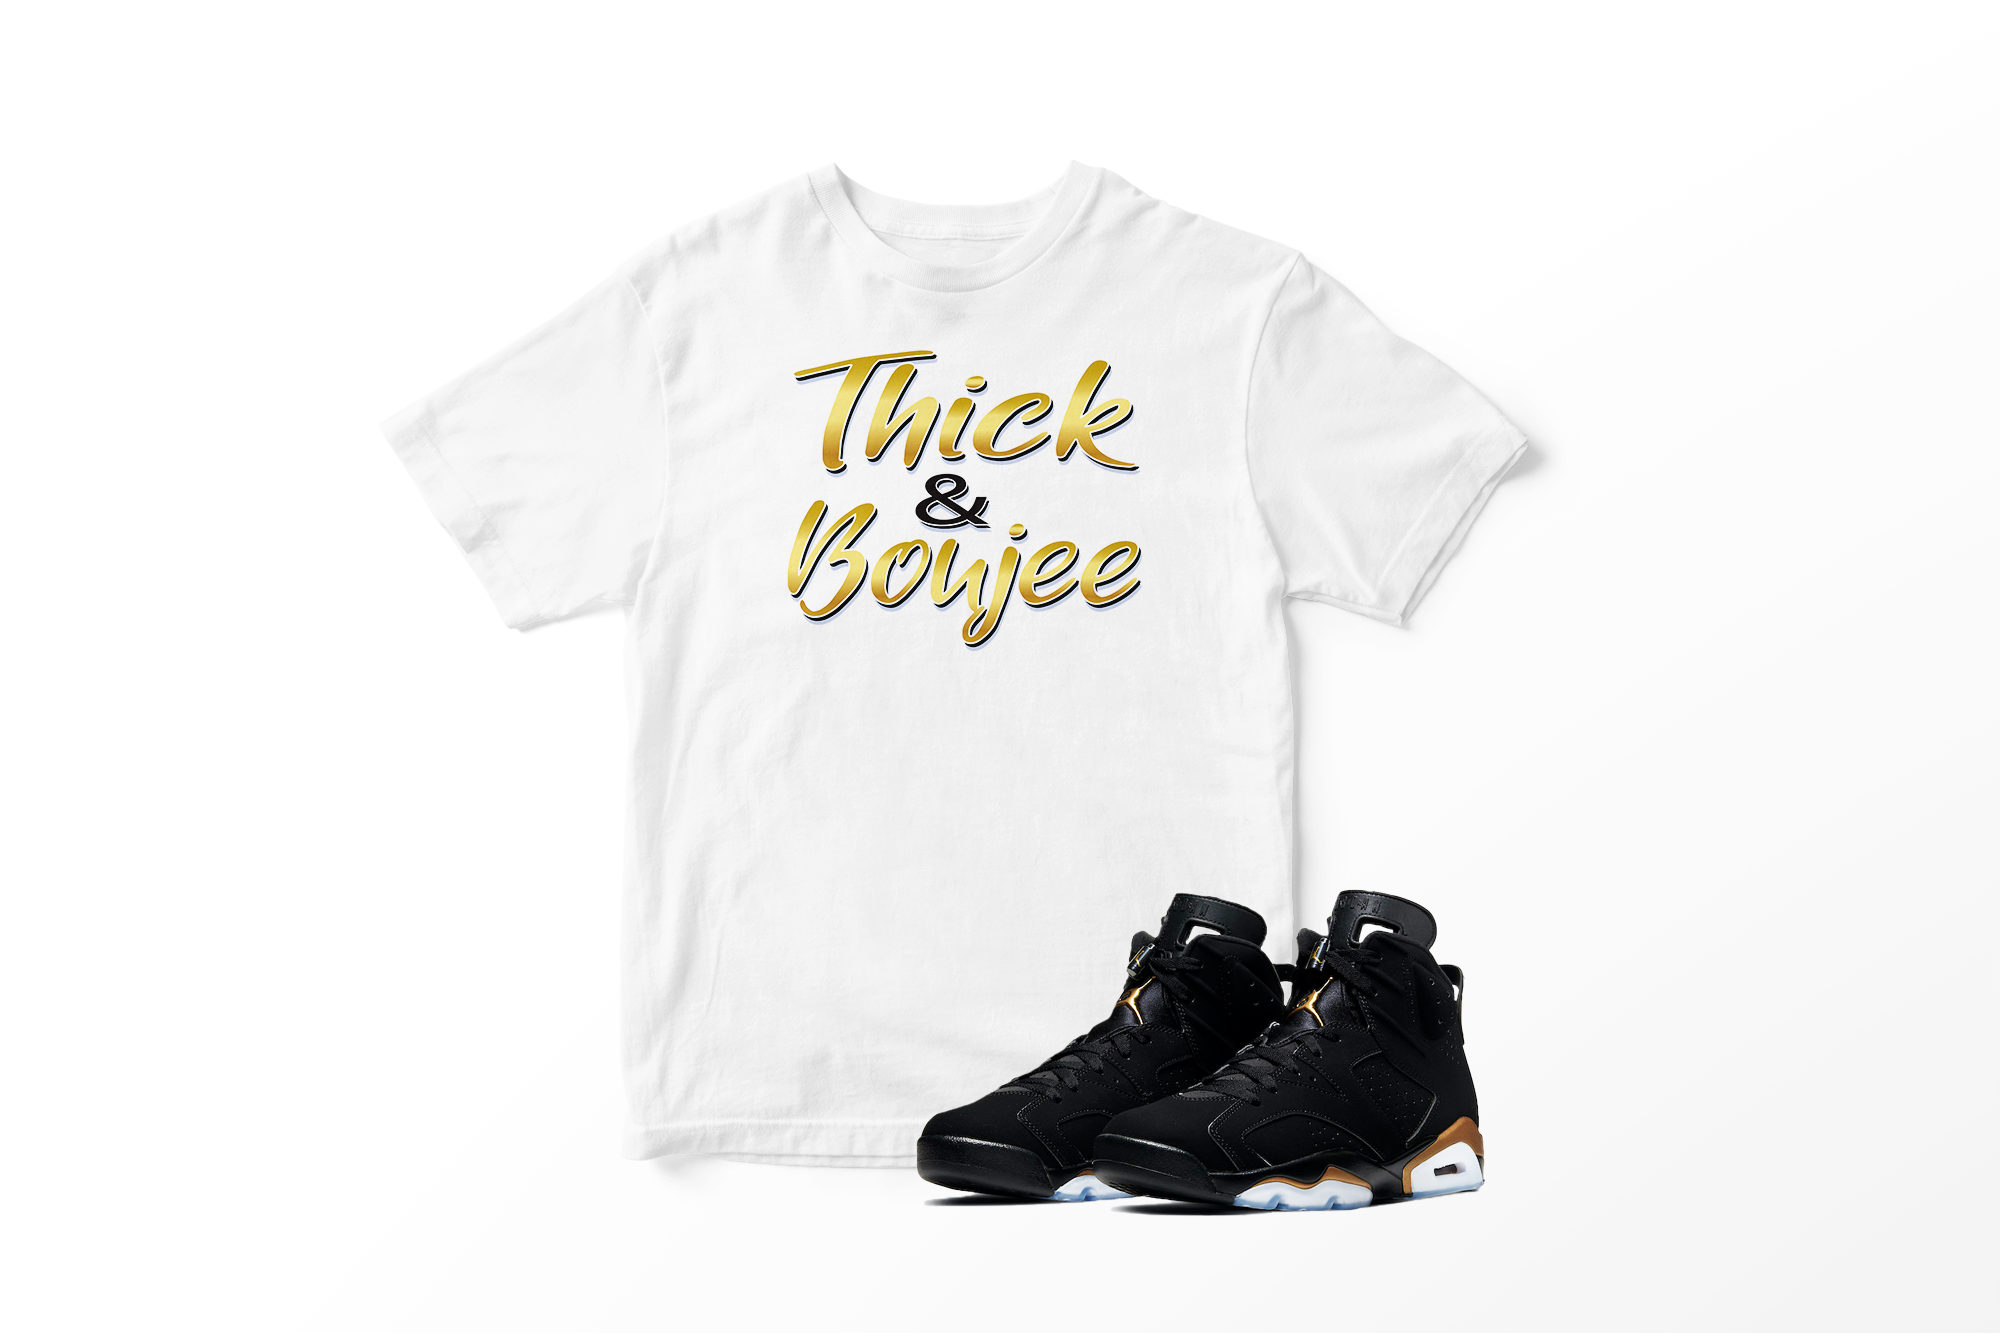 'Thick & Boujee' in DMP CW Short Sleeve Tee